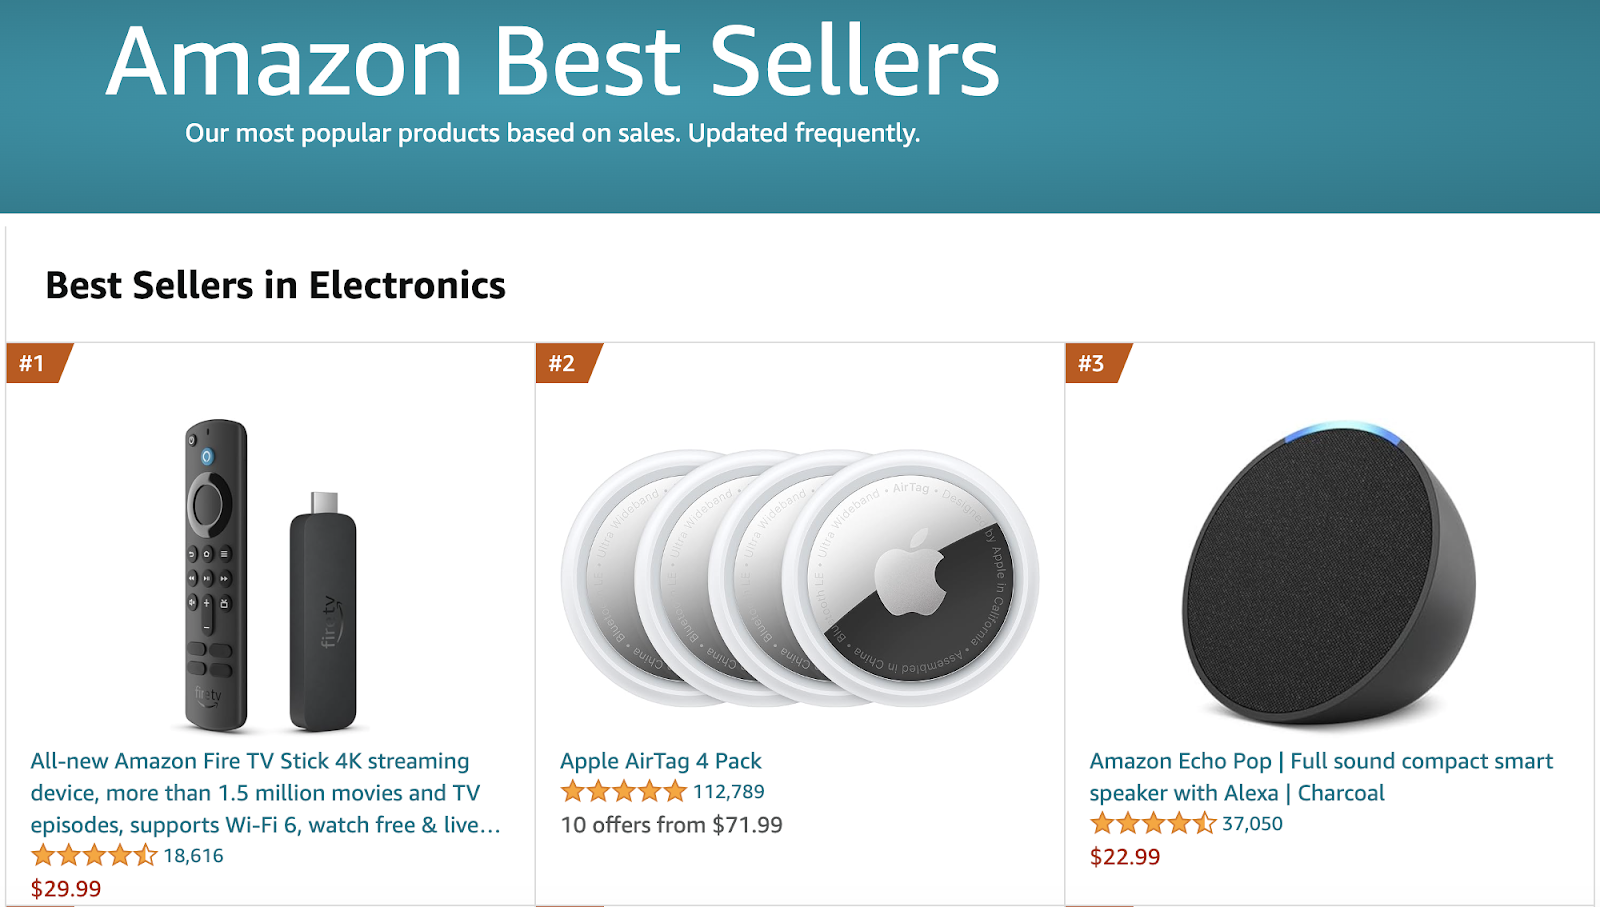 Top Selling Products Based on Amazon Best Sellers Page